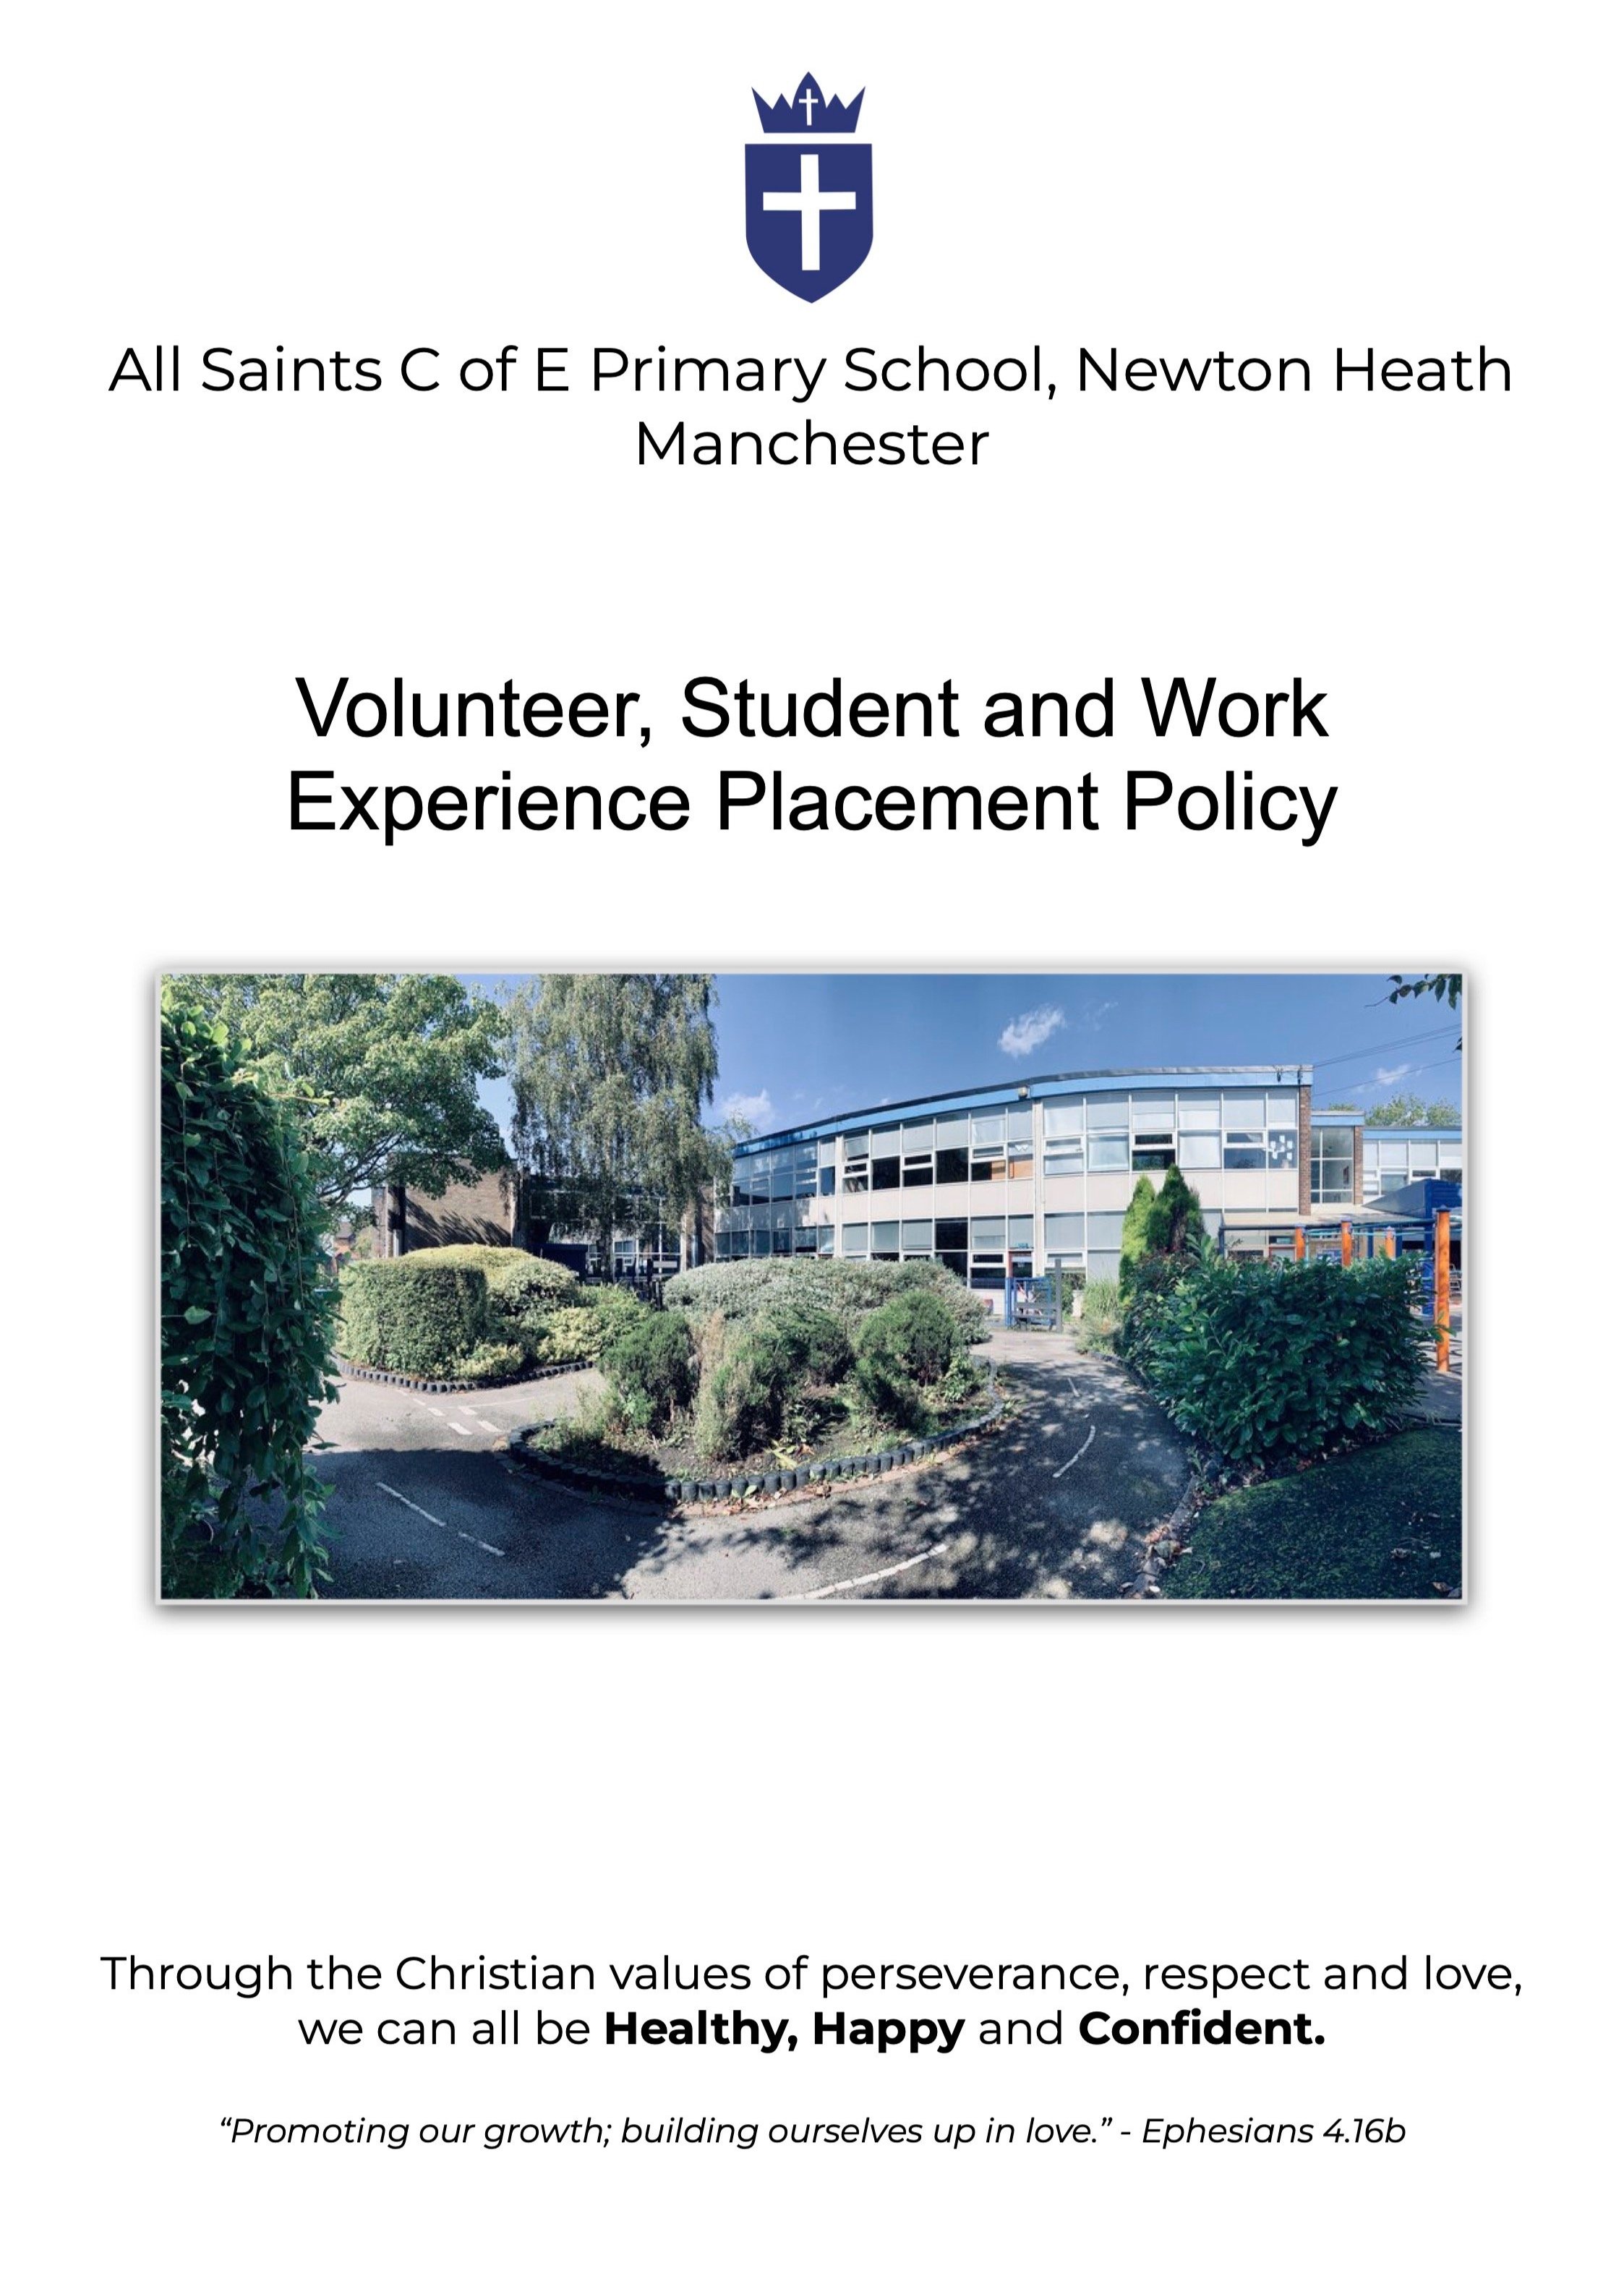 Volunteer%2C+Student+and+Work+Experience+Policy.jpg